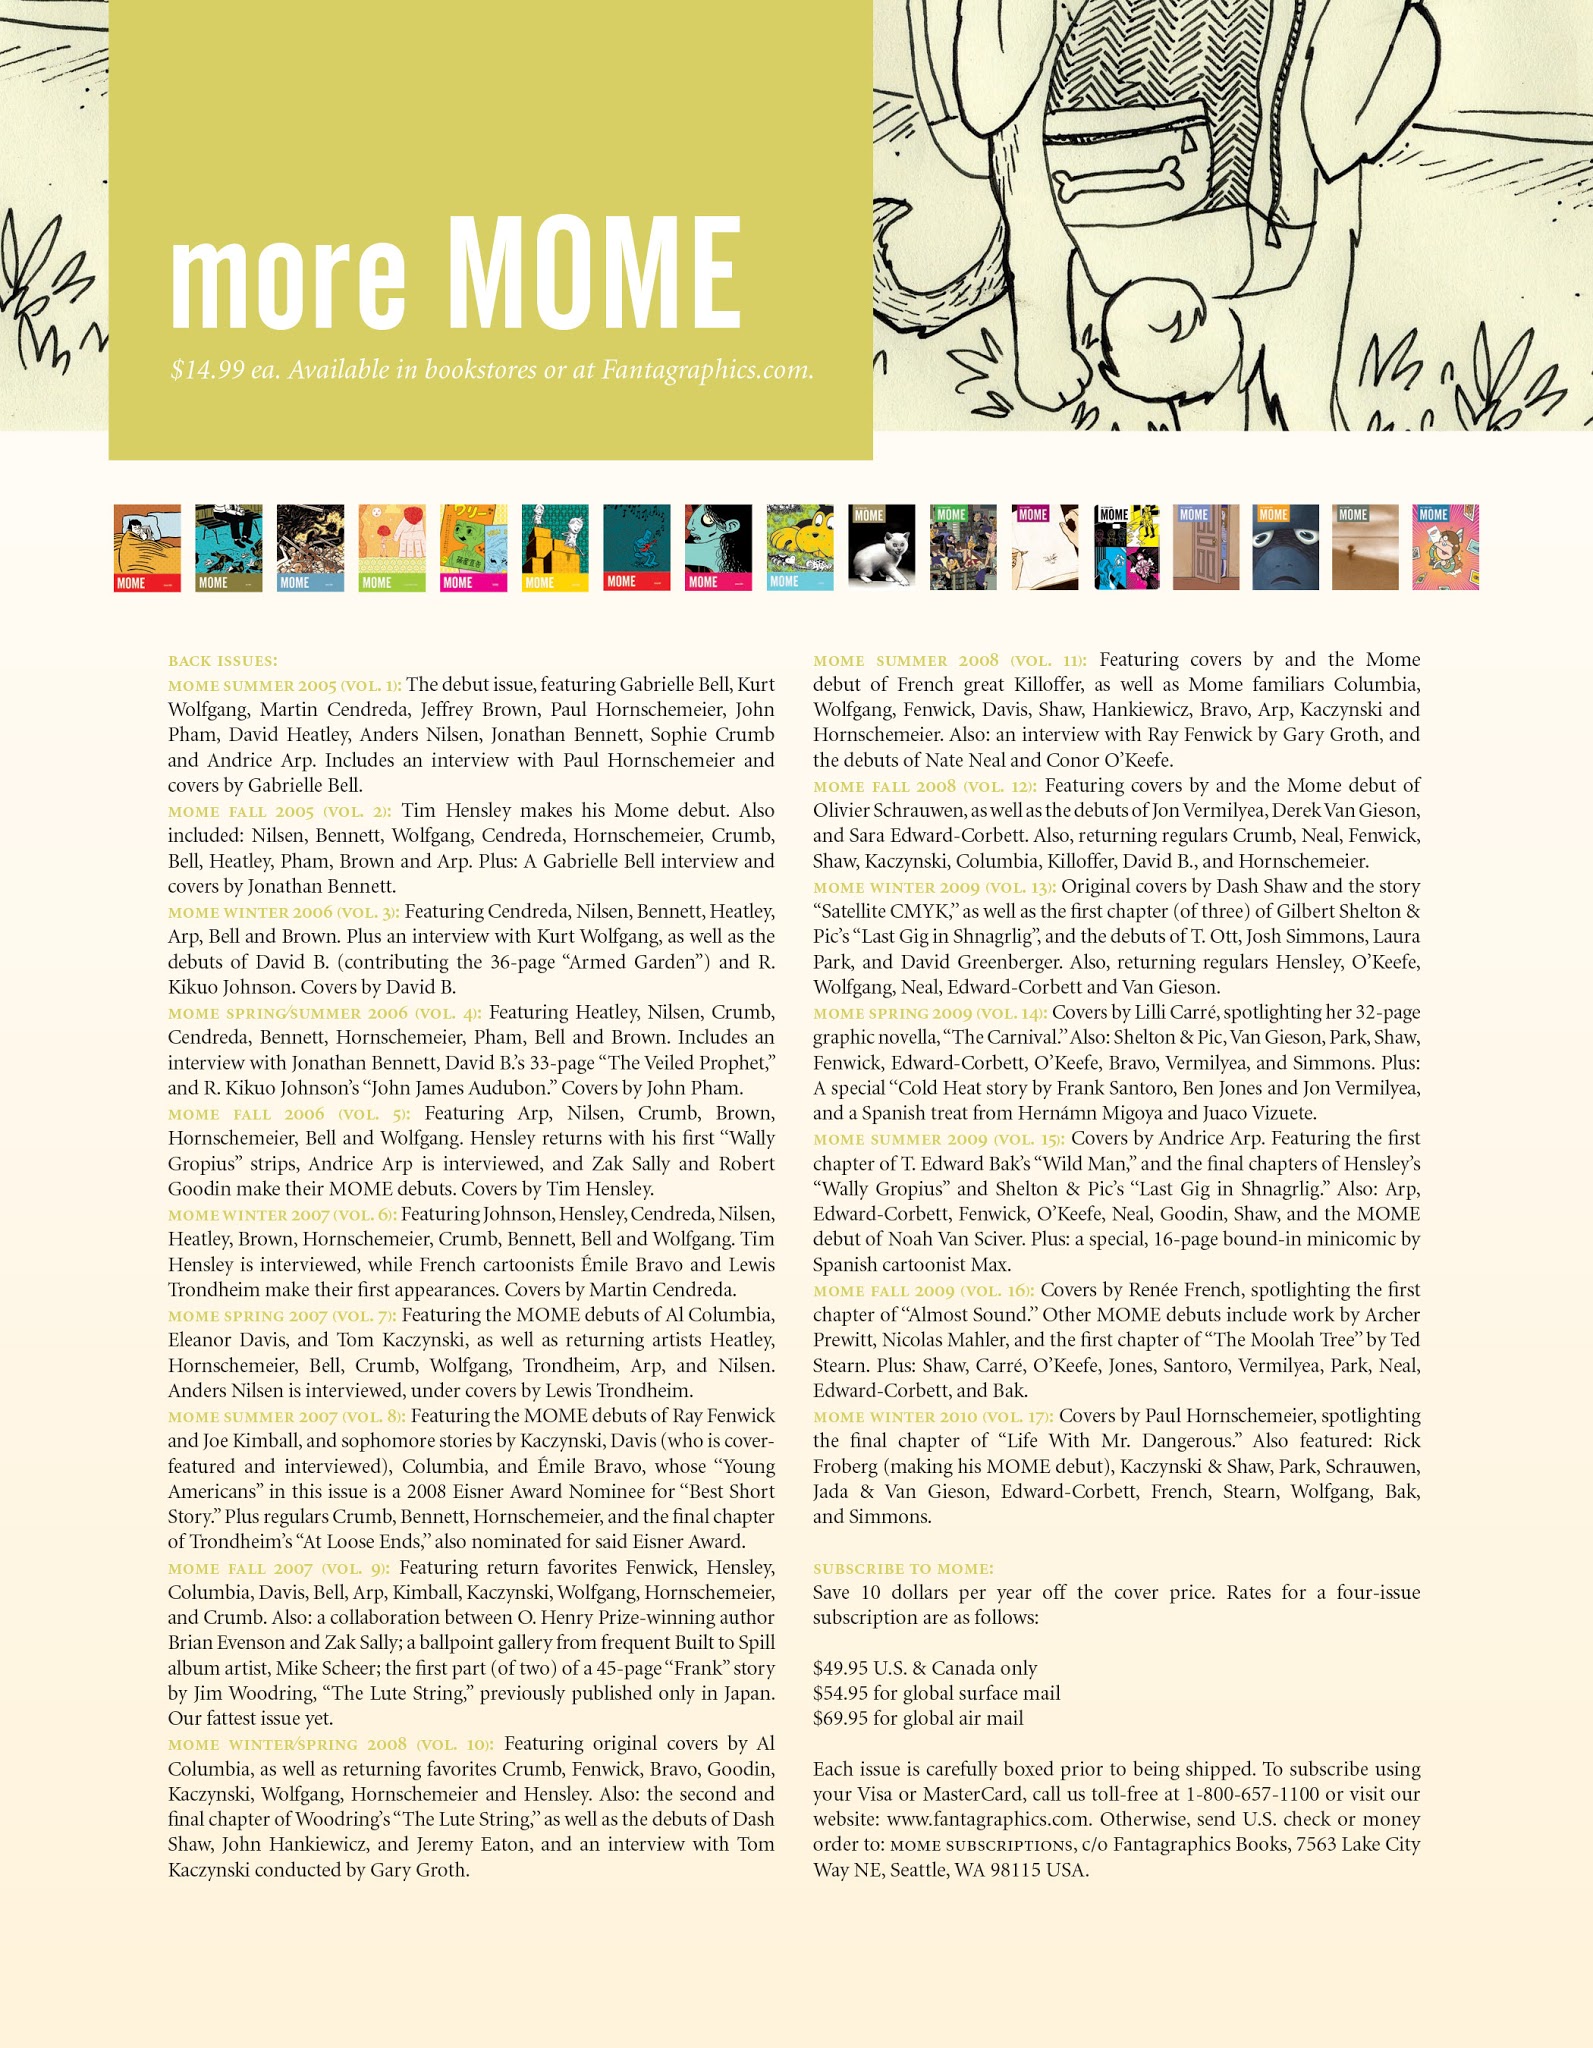 Read online Mome comic -  Issue # TPB 18 - 44